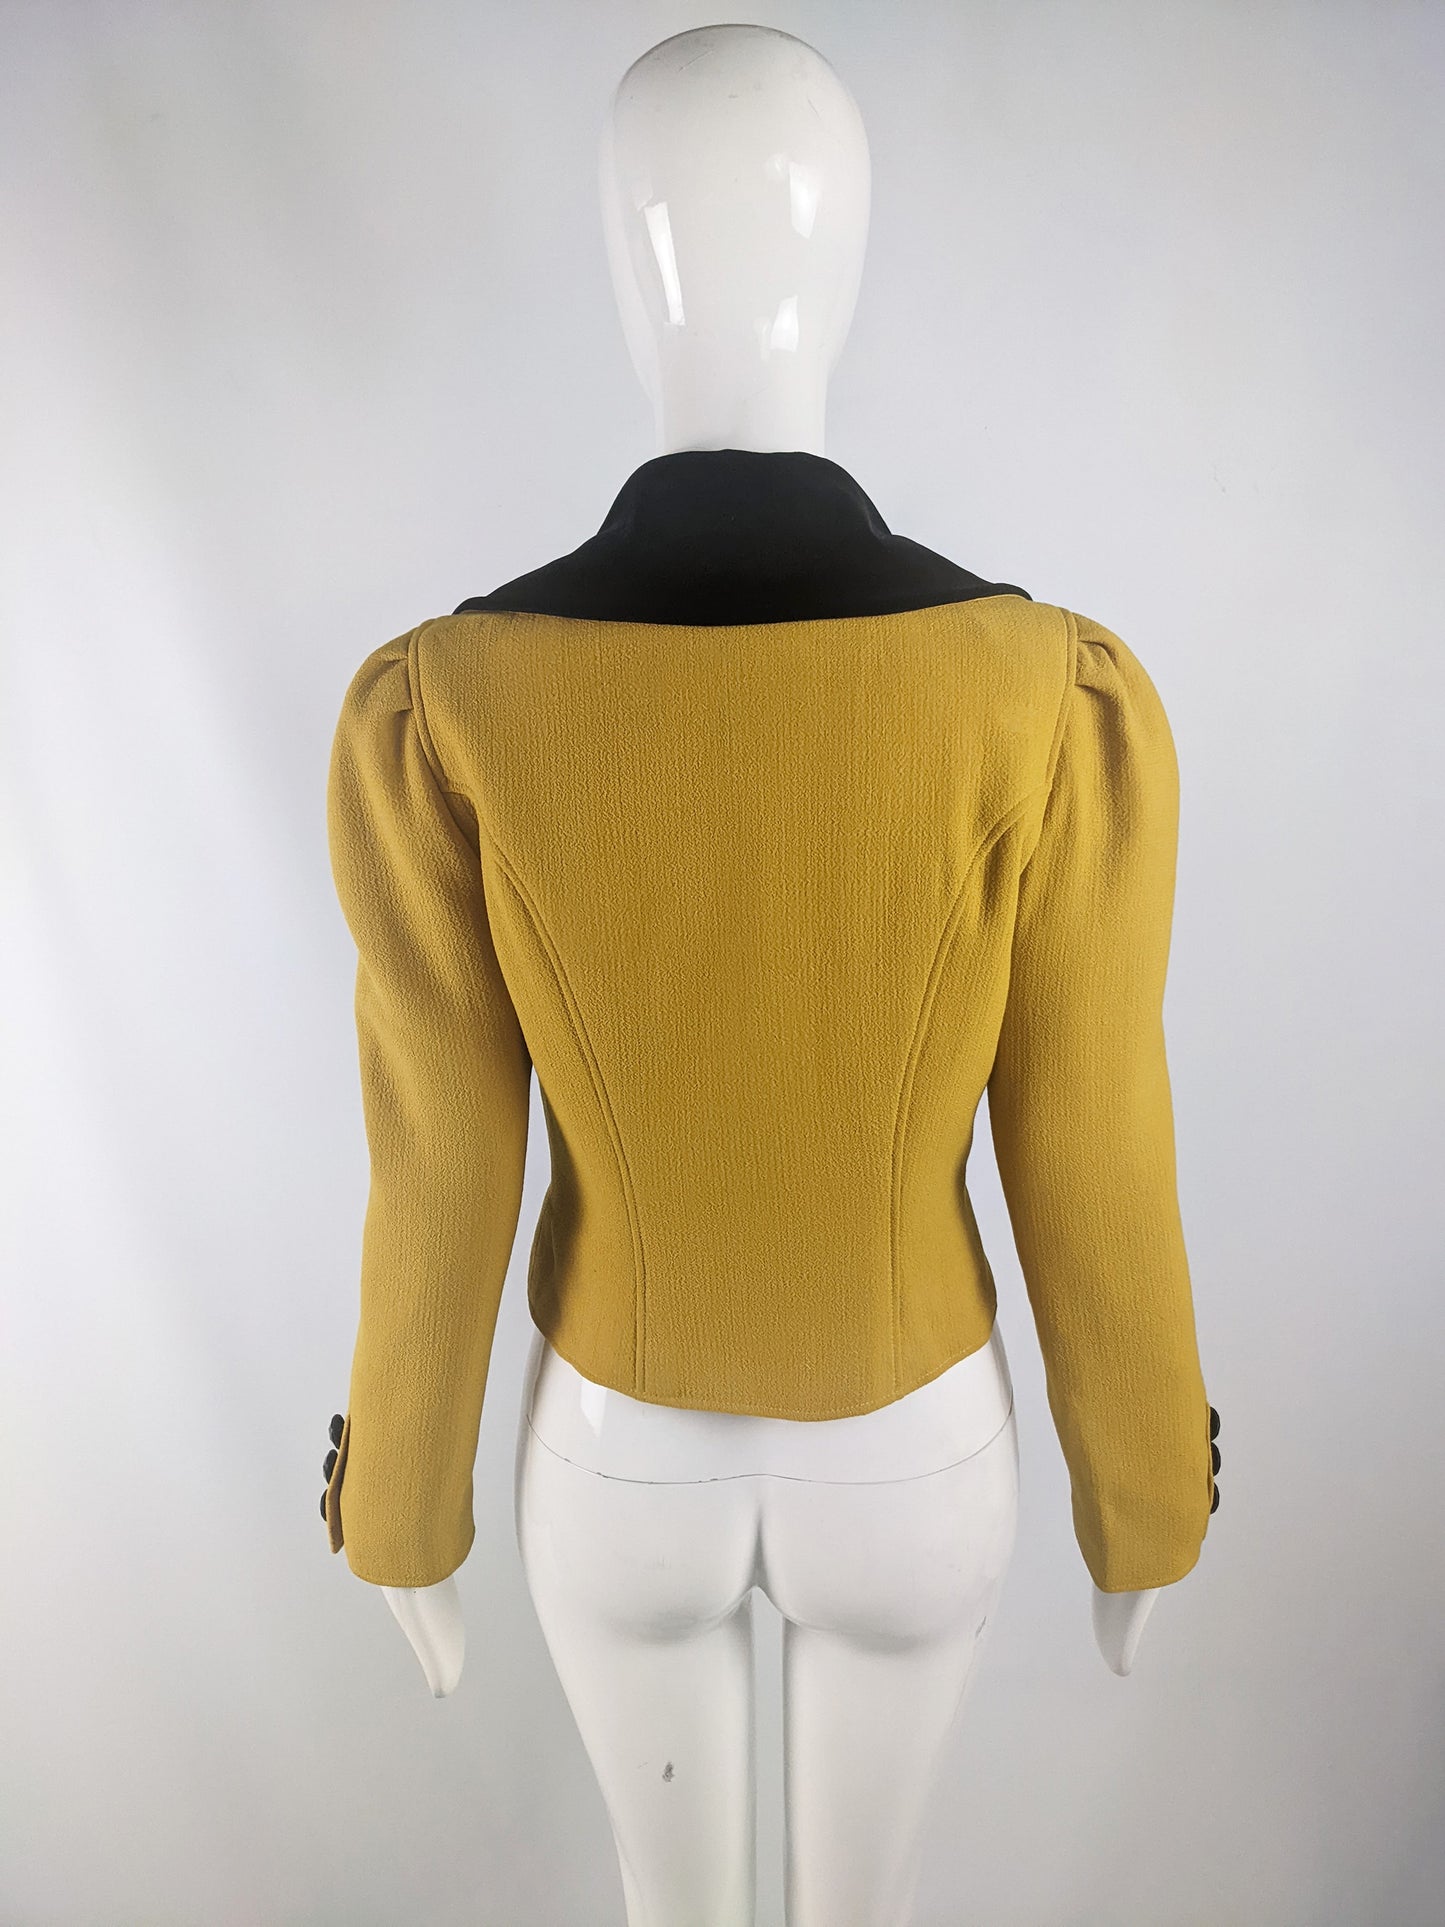 Christian Lacroix Vintage Yellow Cropped Jacket, 1980s